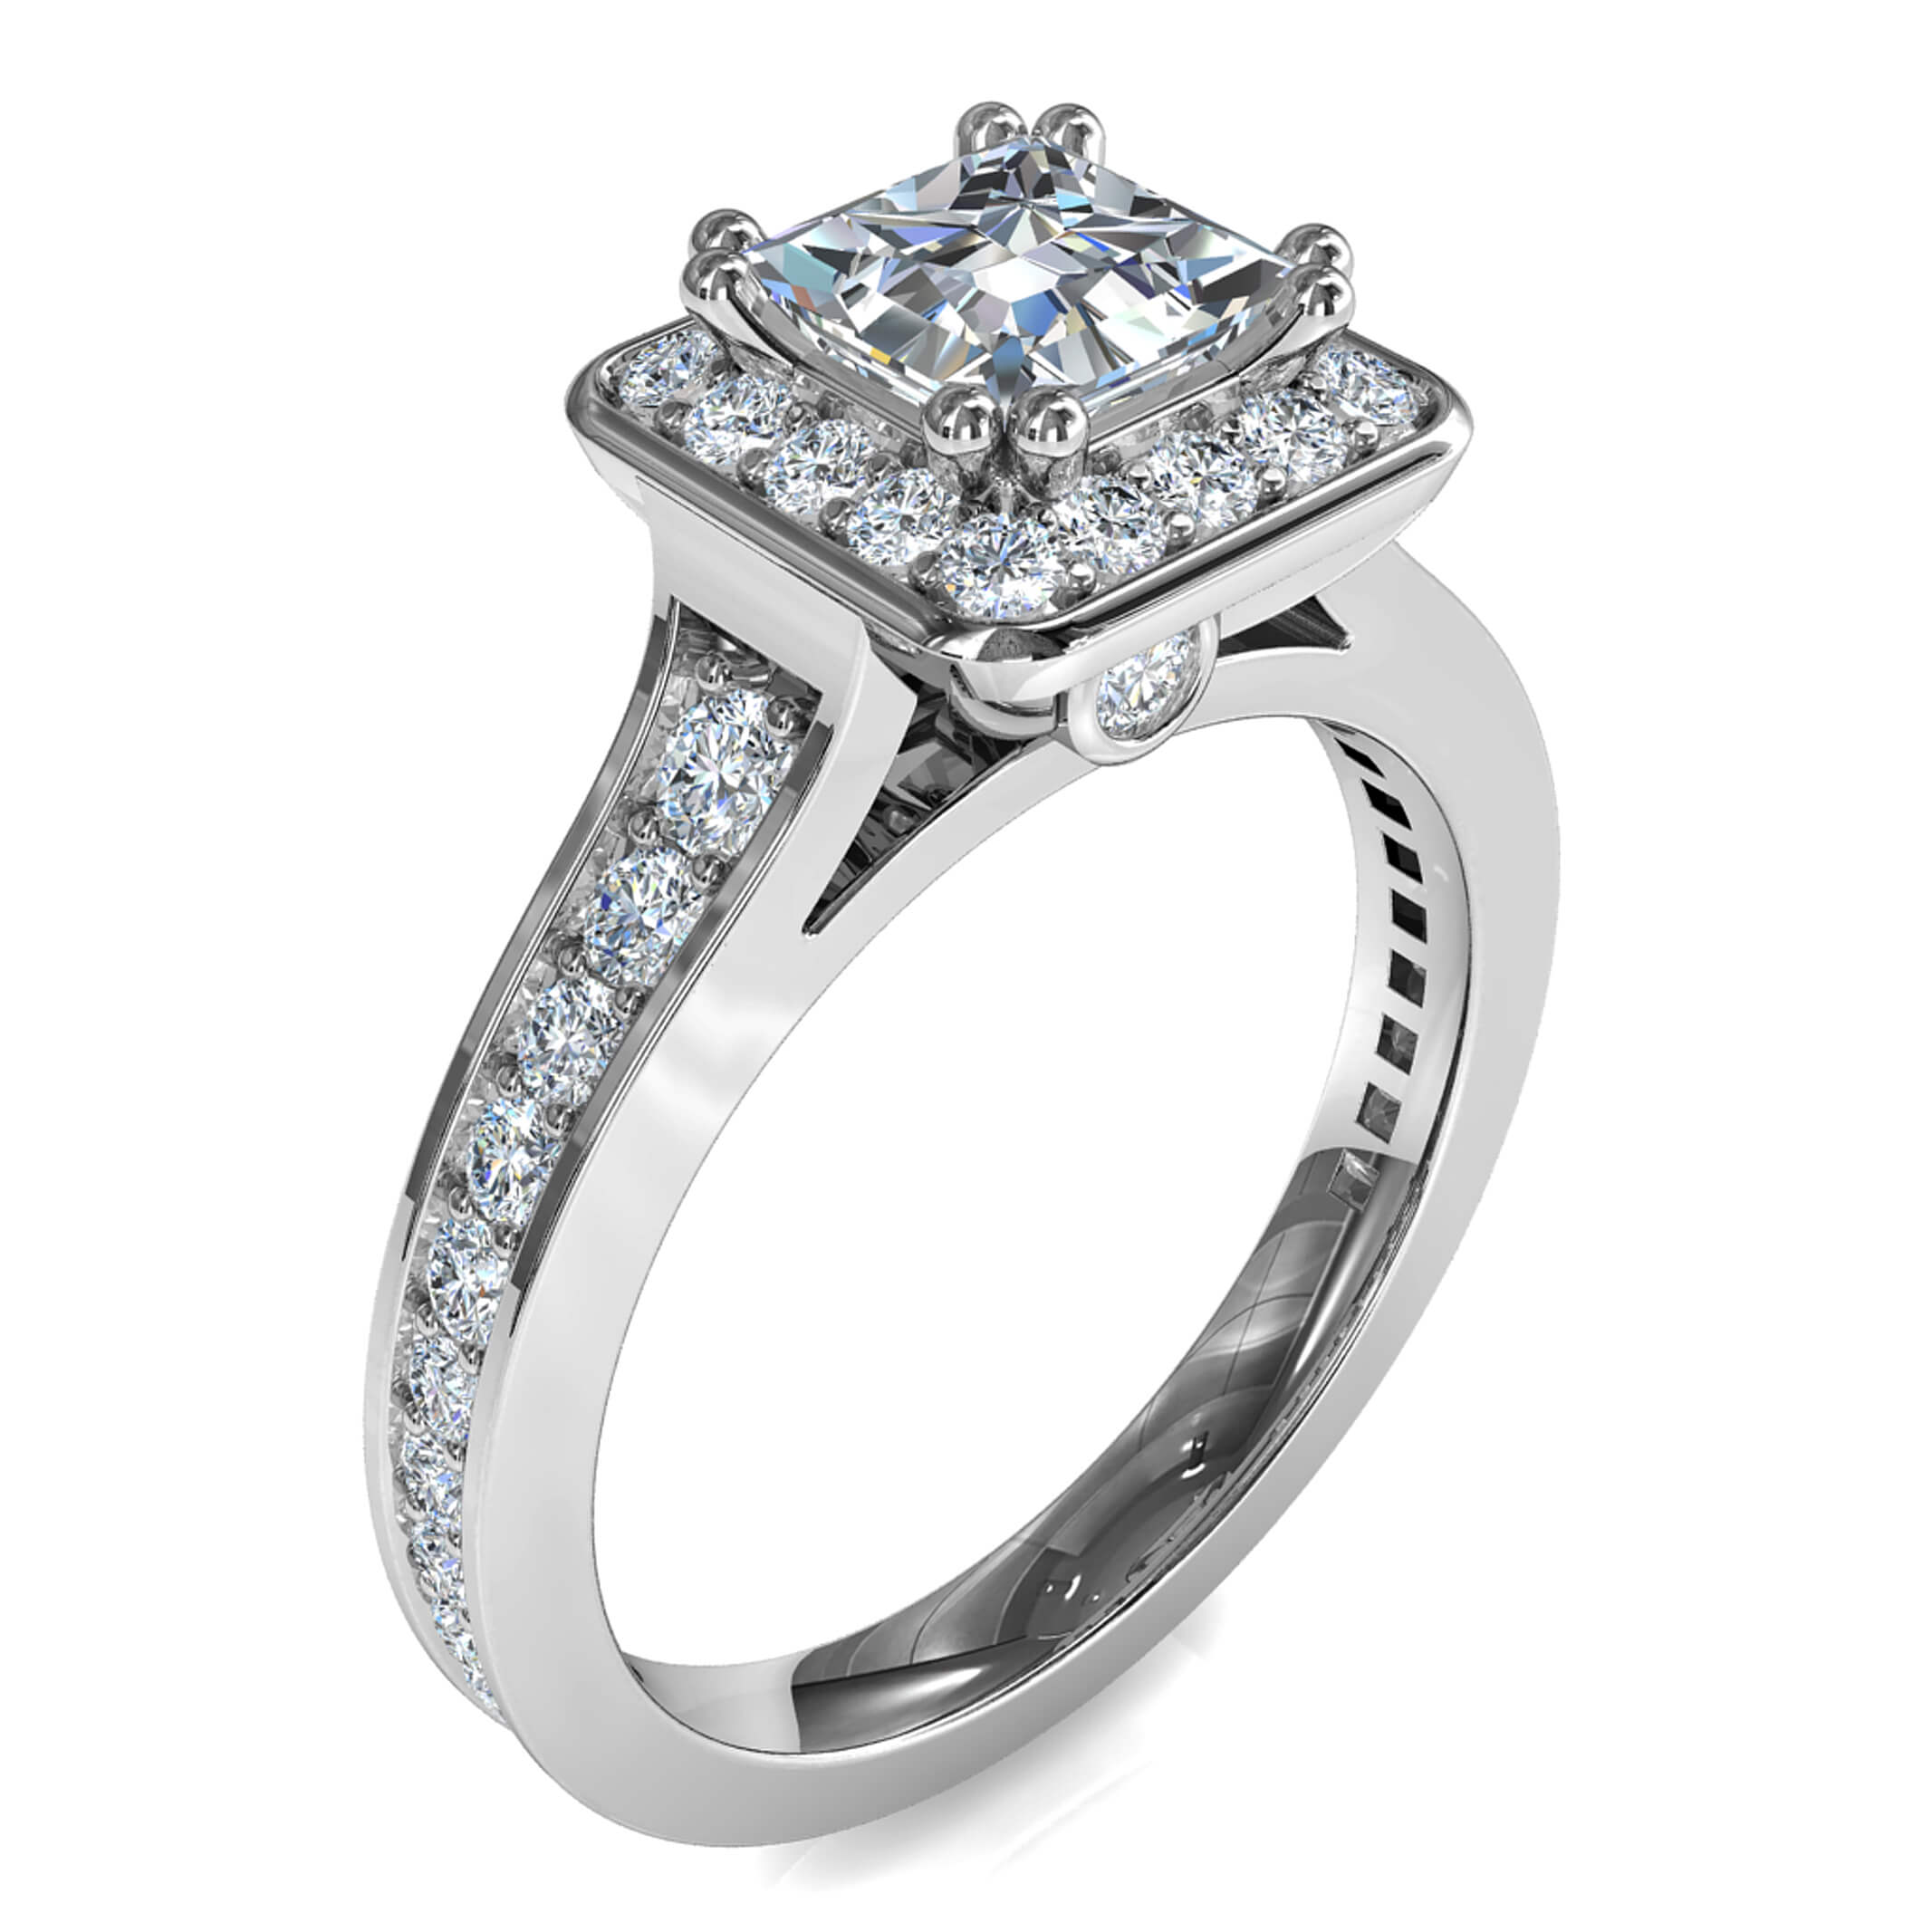 Princess Cut Halo Diamond Engagement Ring, 4 Double Claws Set in a Bead Set Halo on a Tapering Bead Set Band with Hidden Diamond Undersetting.